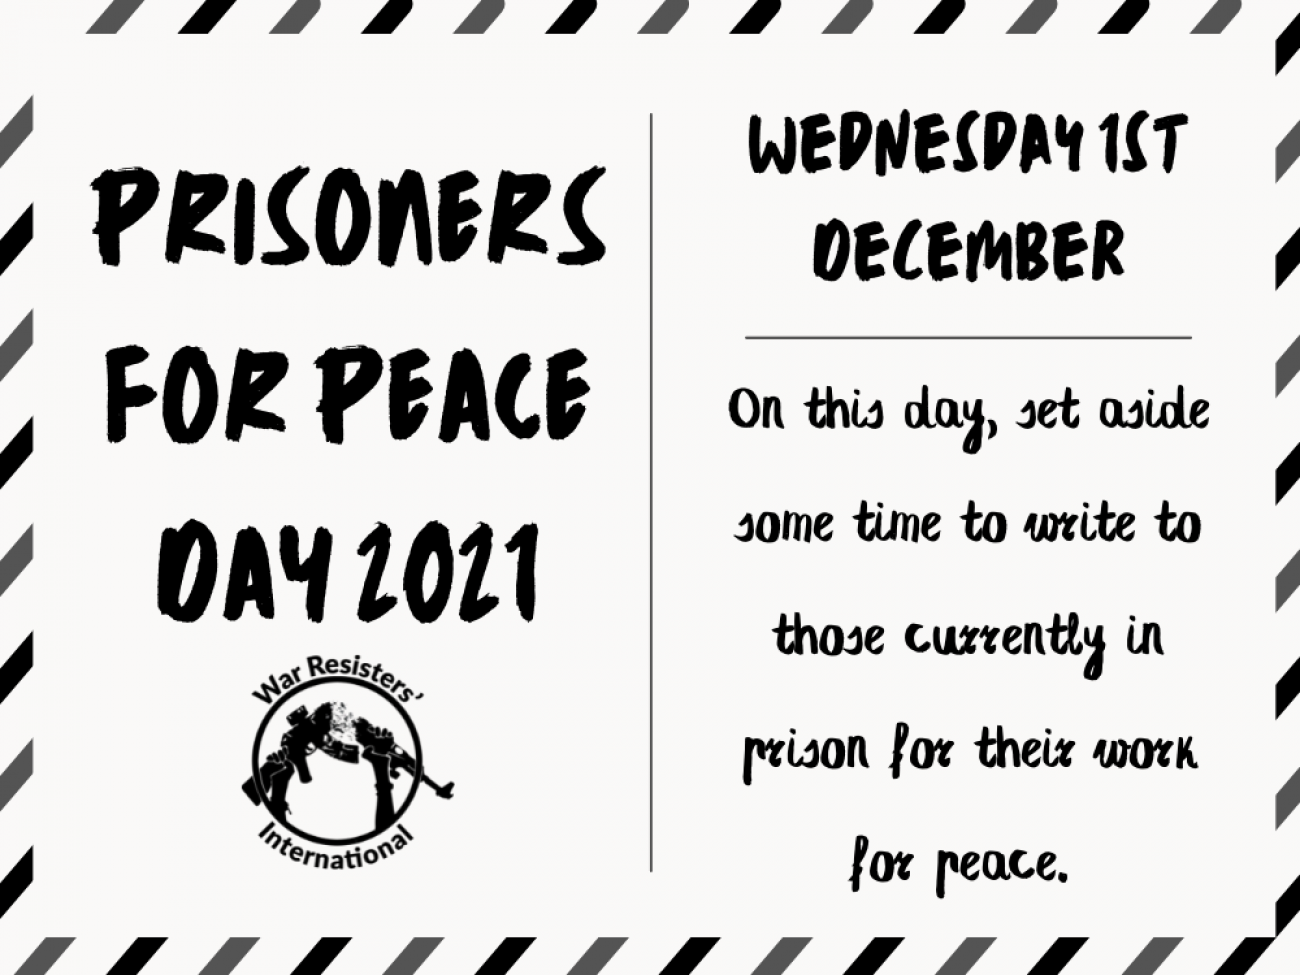 Prisoners for Peace Day